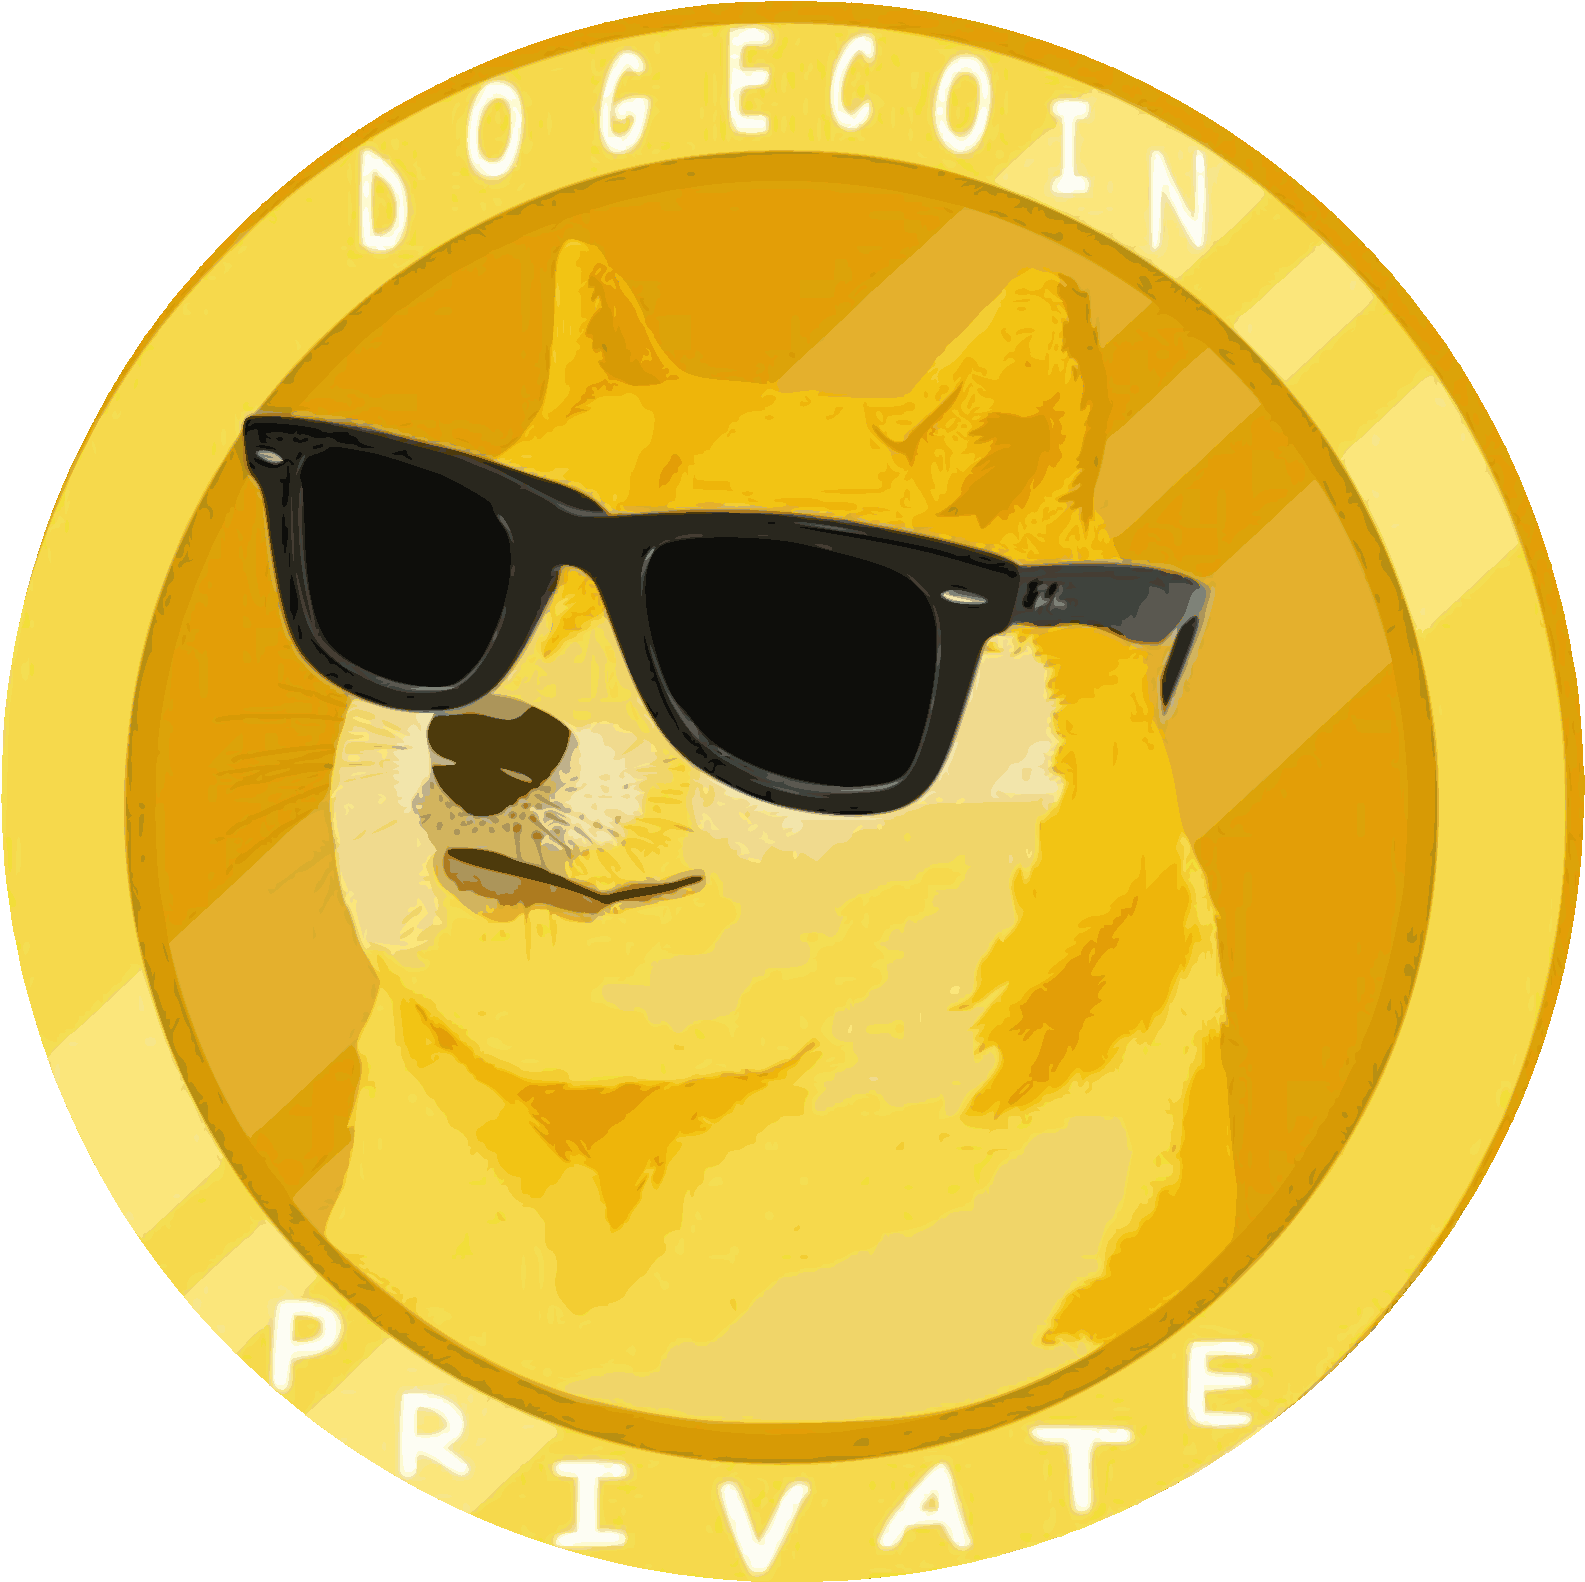 Dogecoin Private Cool Shiba Inu Coin Design PNG